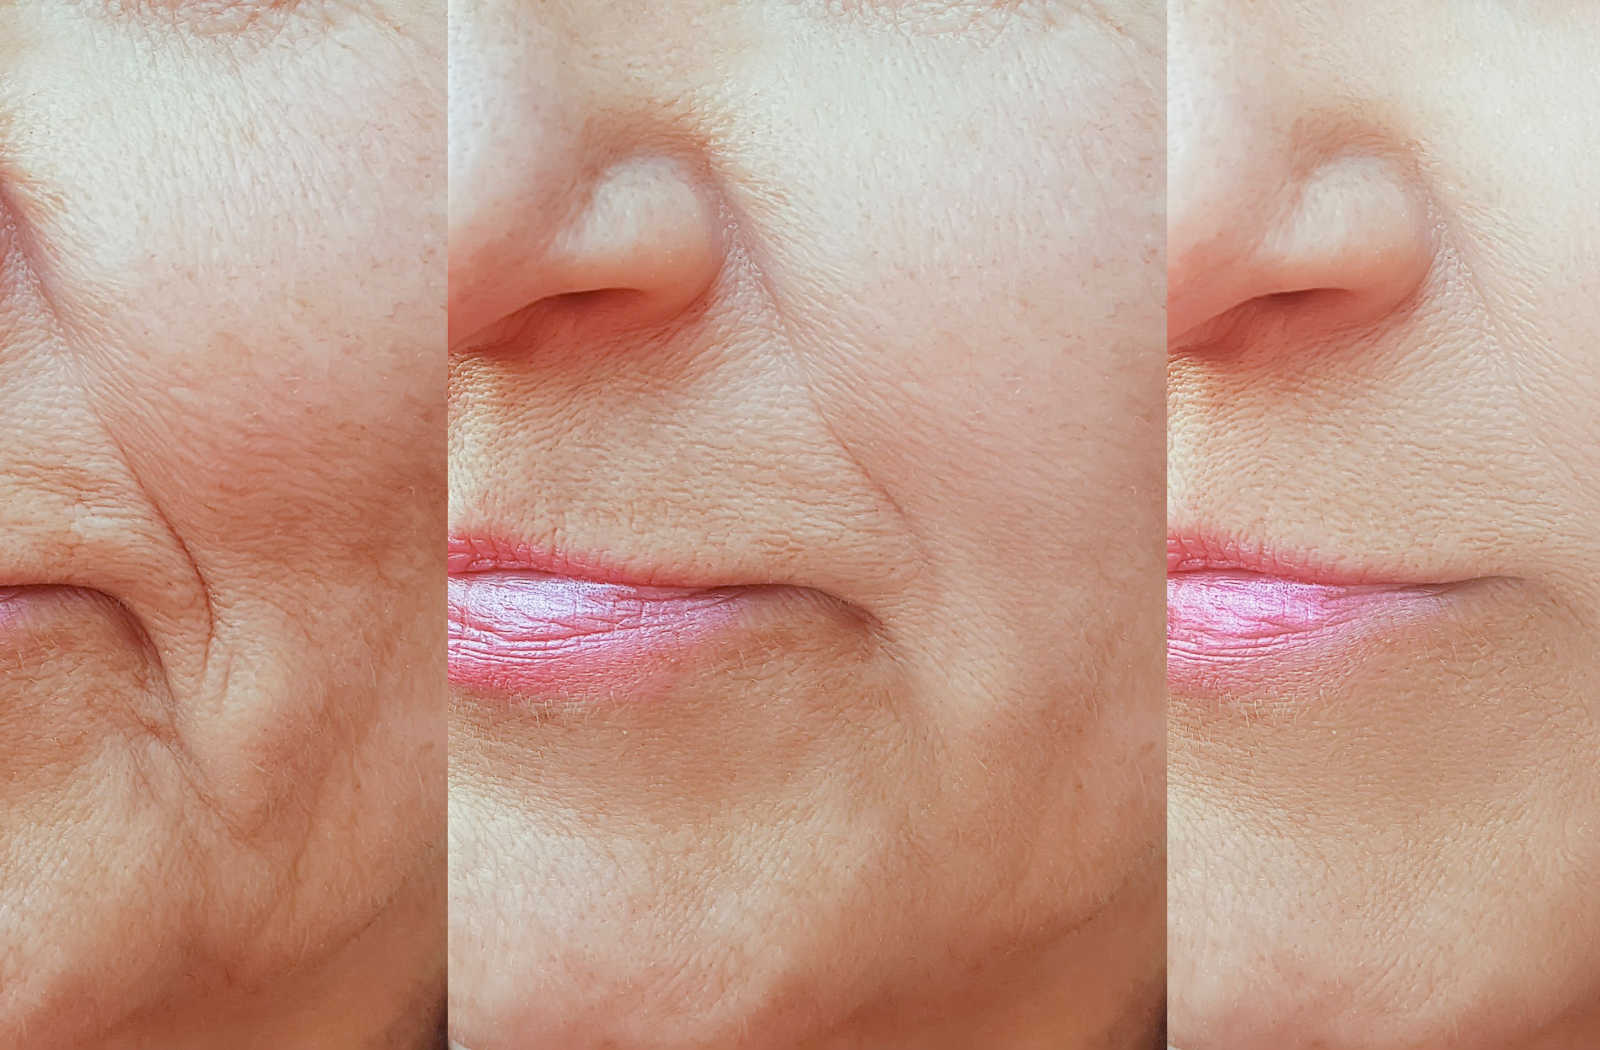 Comparison of an old woman's face with wrinkles before and after treatment.